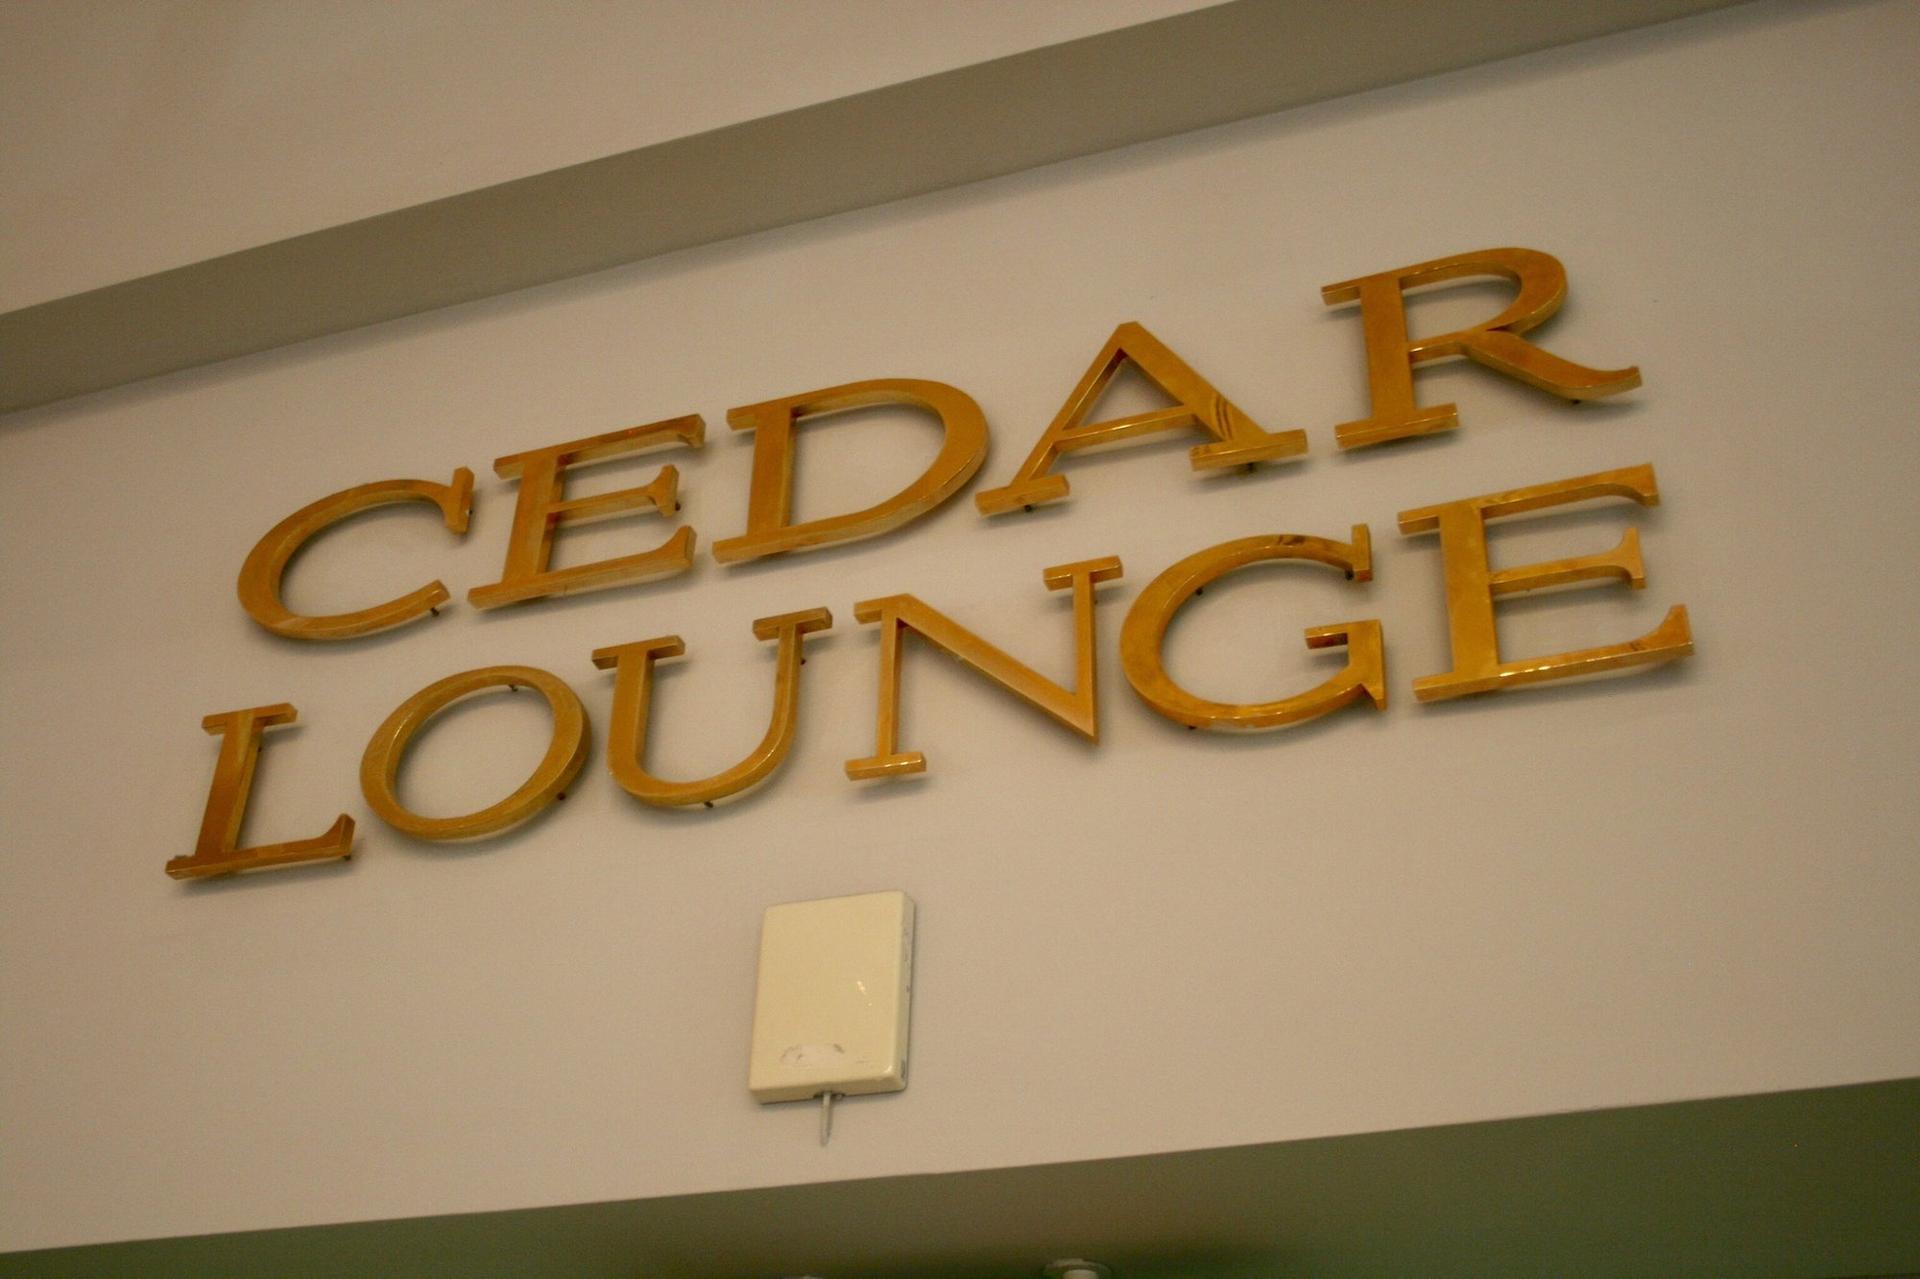 Middle East Airlines Cedar Lounge image 14 of 18